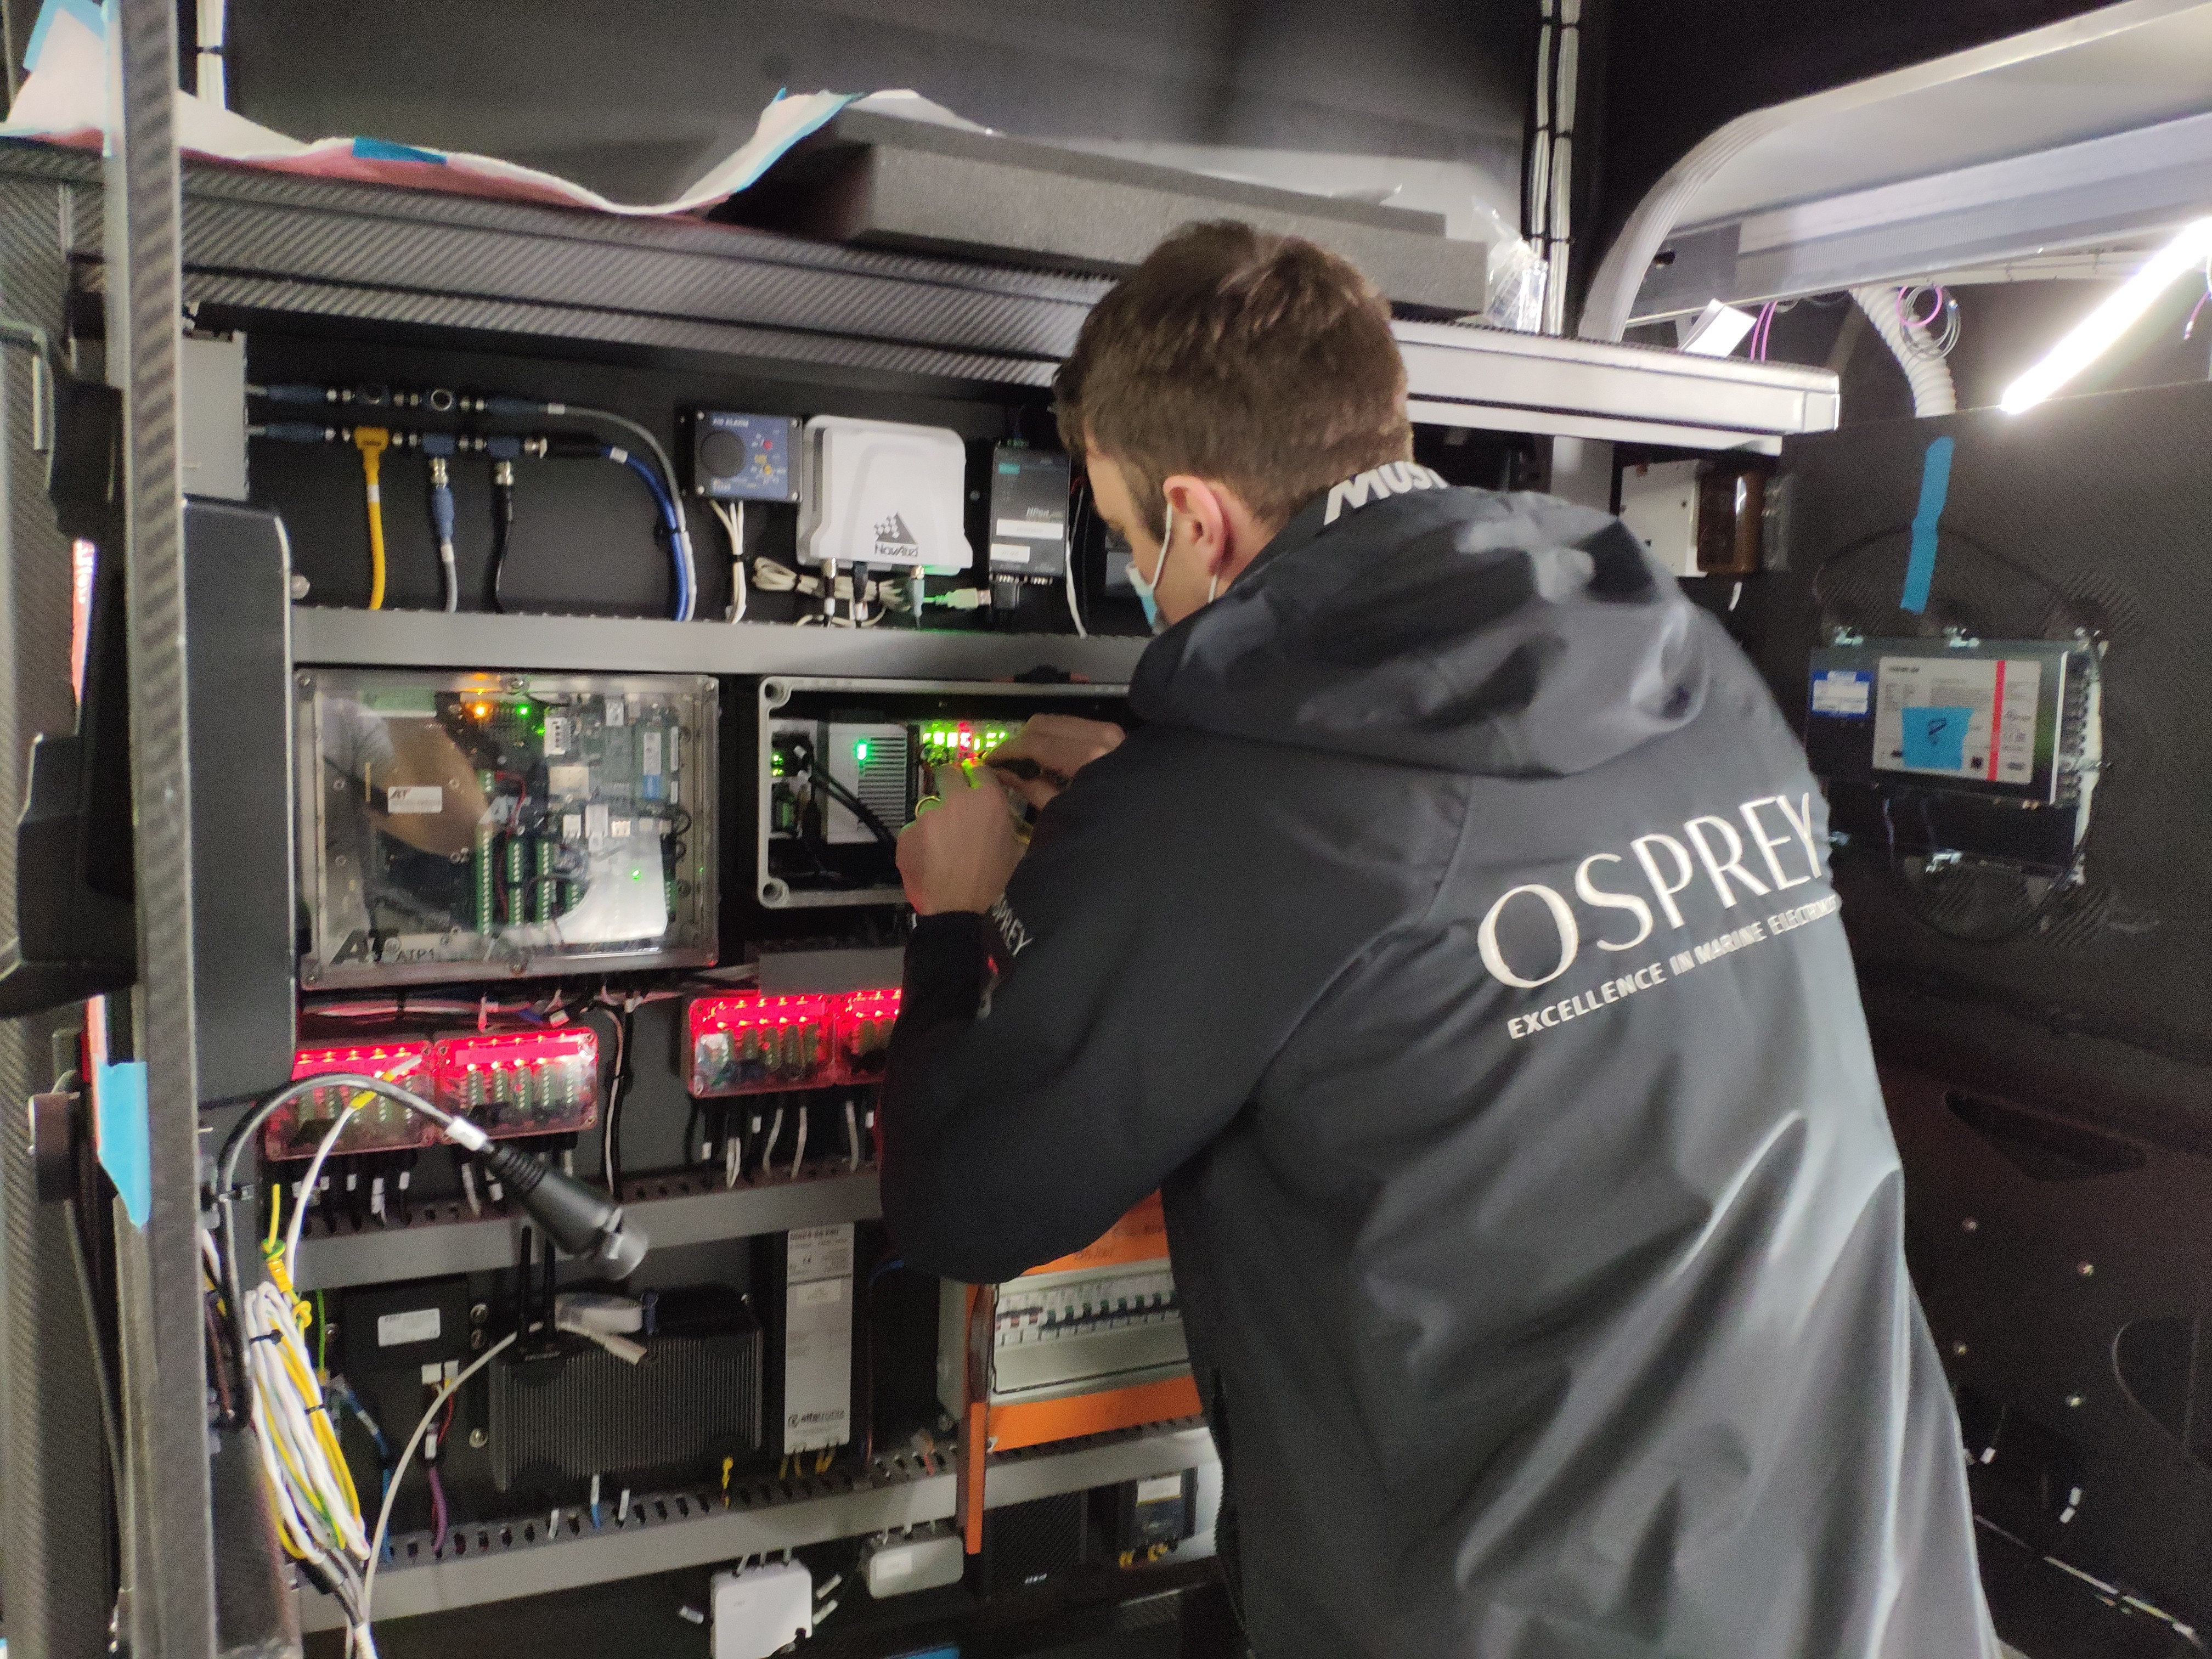 Integrating the electronic networks and systems of the ClubSwan 125 was a big, complex project for Osprey that required its technicians to anticipate potential issues and have the solutions in mind well ahead of time.